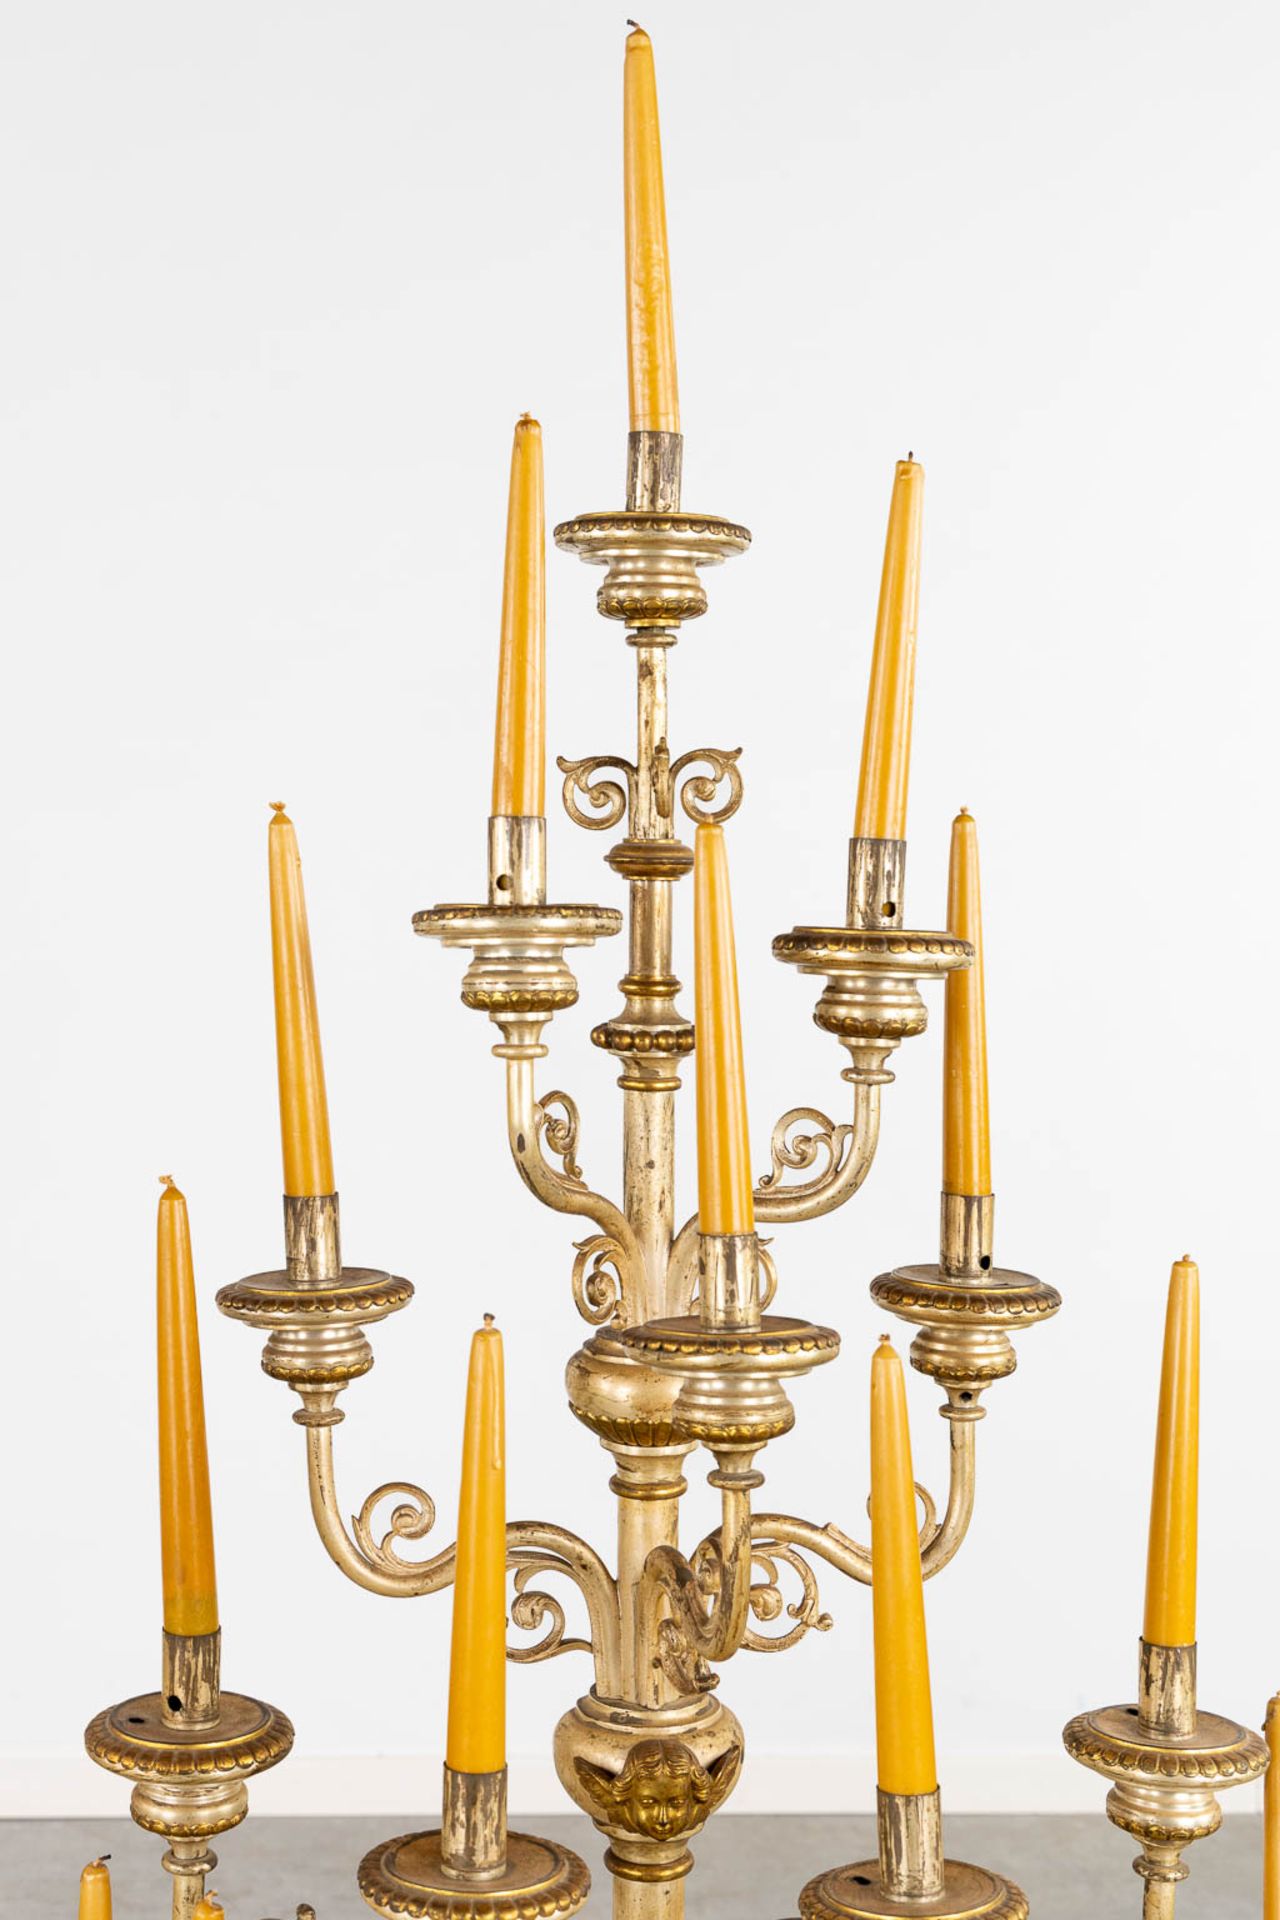 An impressive pair of candelabra, 15 candles, gold and silver-plated metal. (L:44 x W:60 x H:138 cm) - Bild 10 aus 12